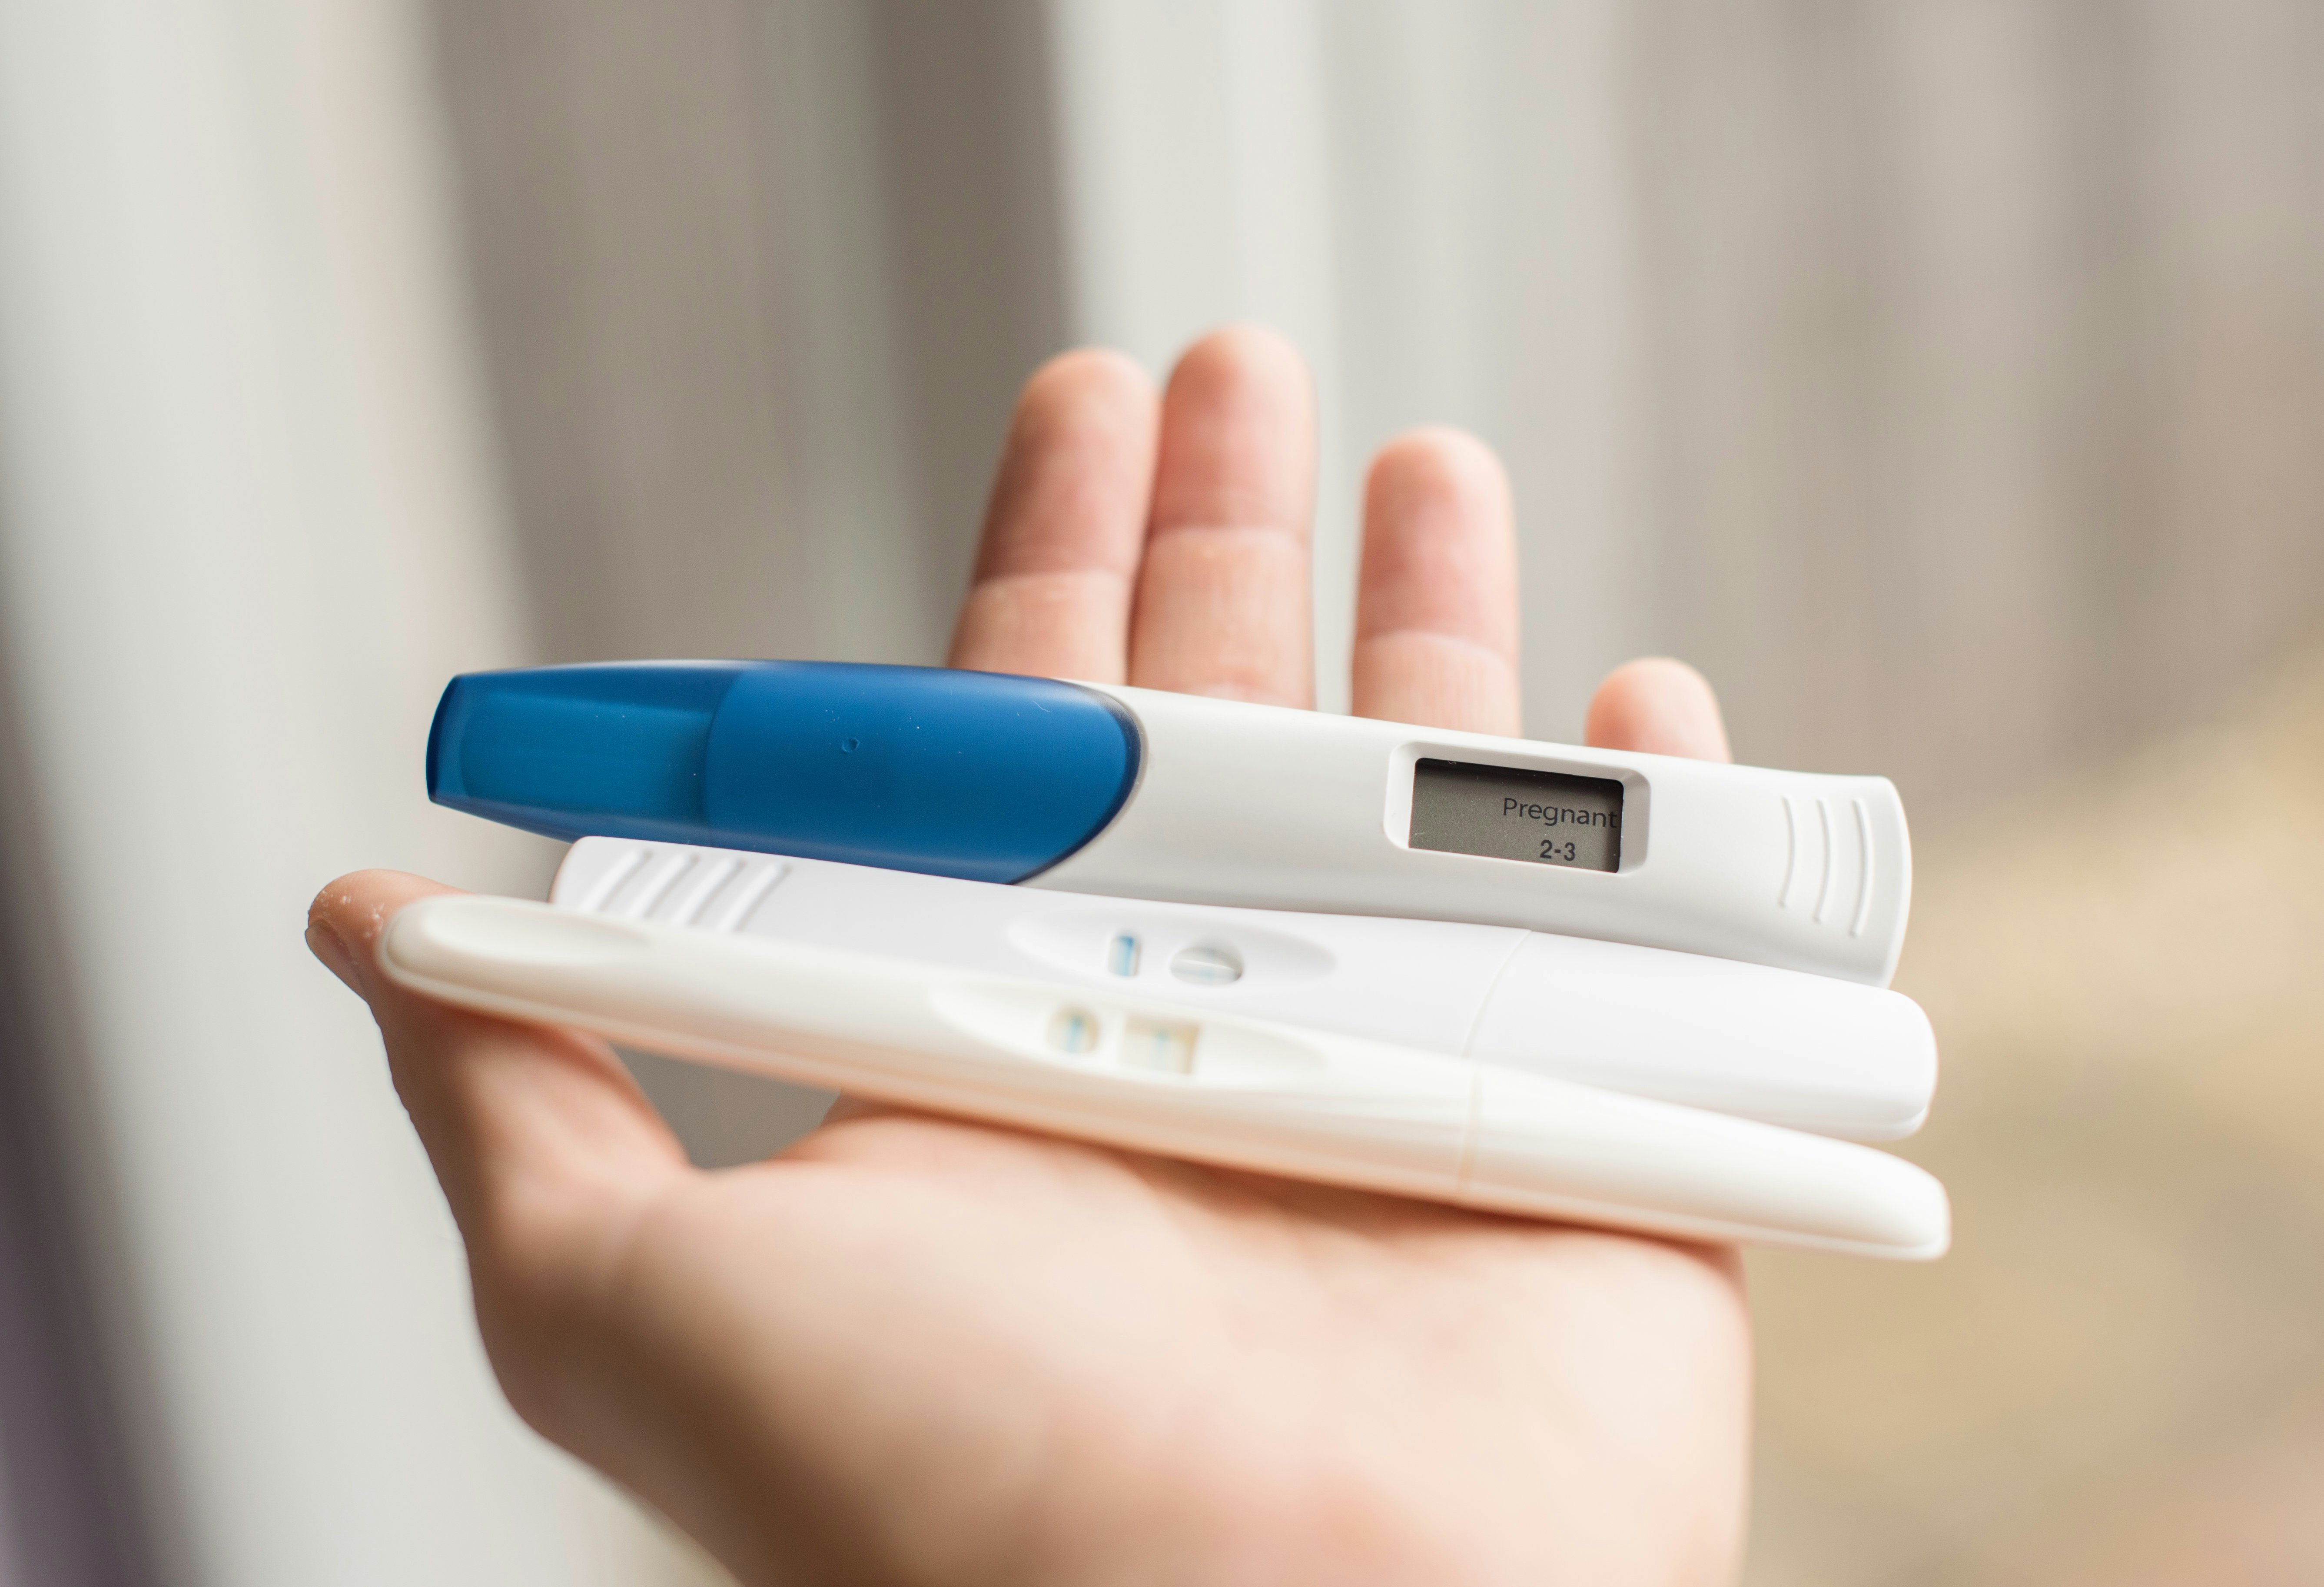 Pros and Cons of Early Pregnancy Tests